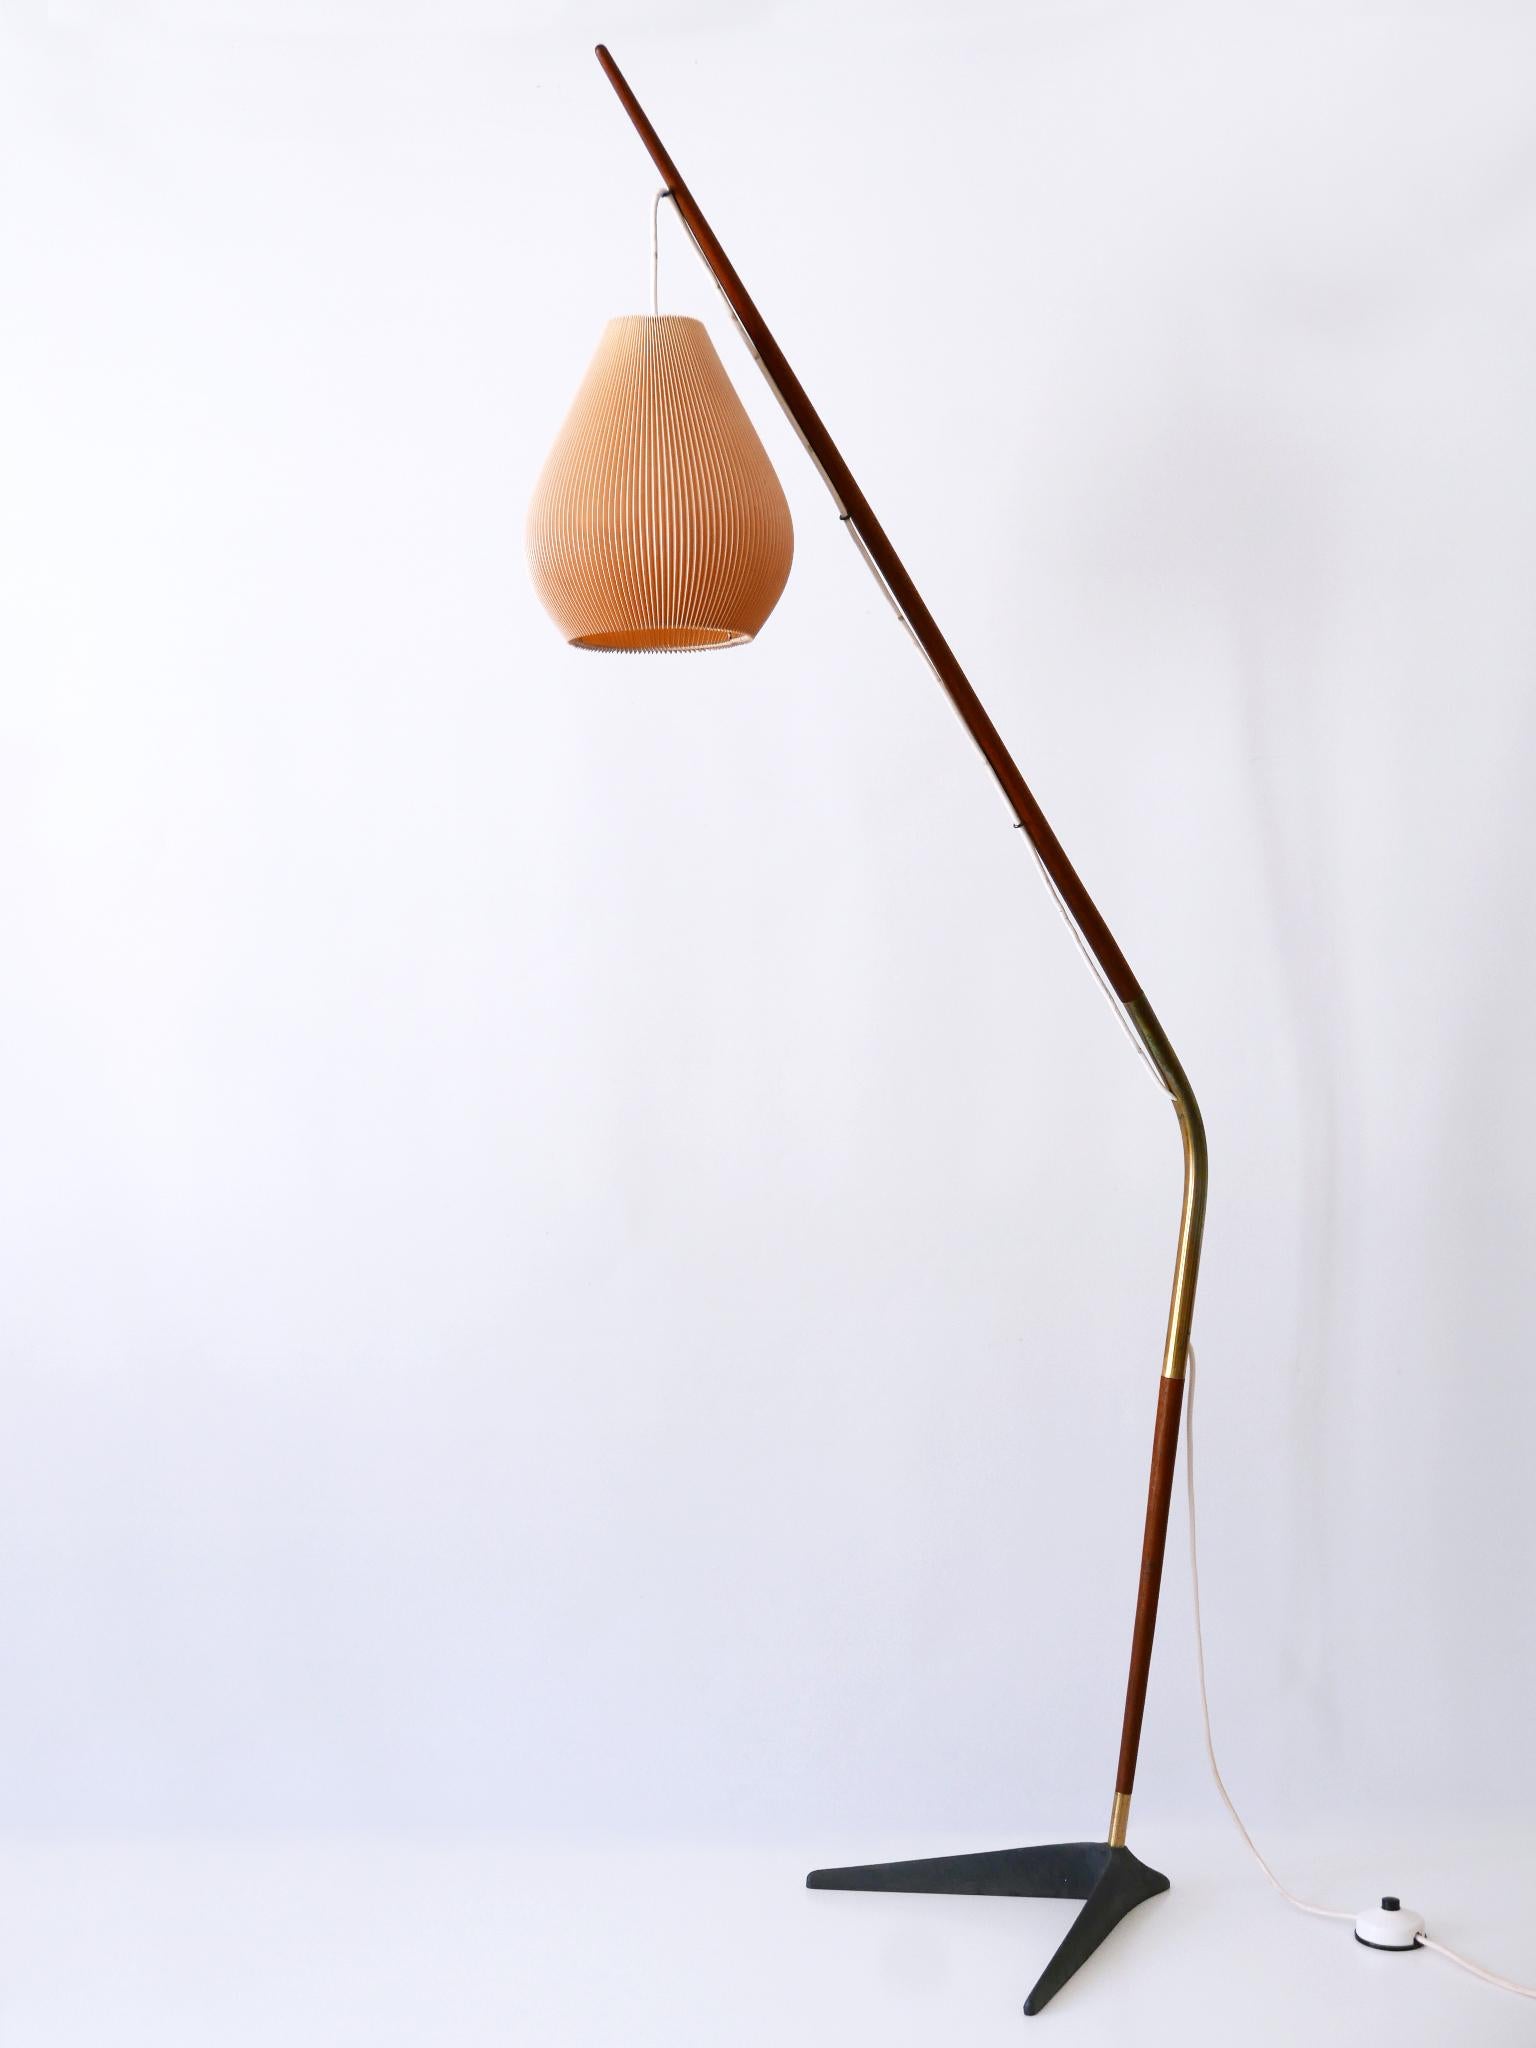 Mid-Century Modern Exceptional 'Fishing Pole' Floor Lamp by Svend Aage Holm Sørensen Denmark 1950s For Sale